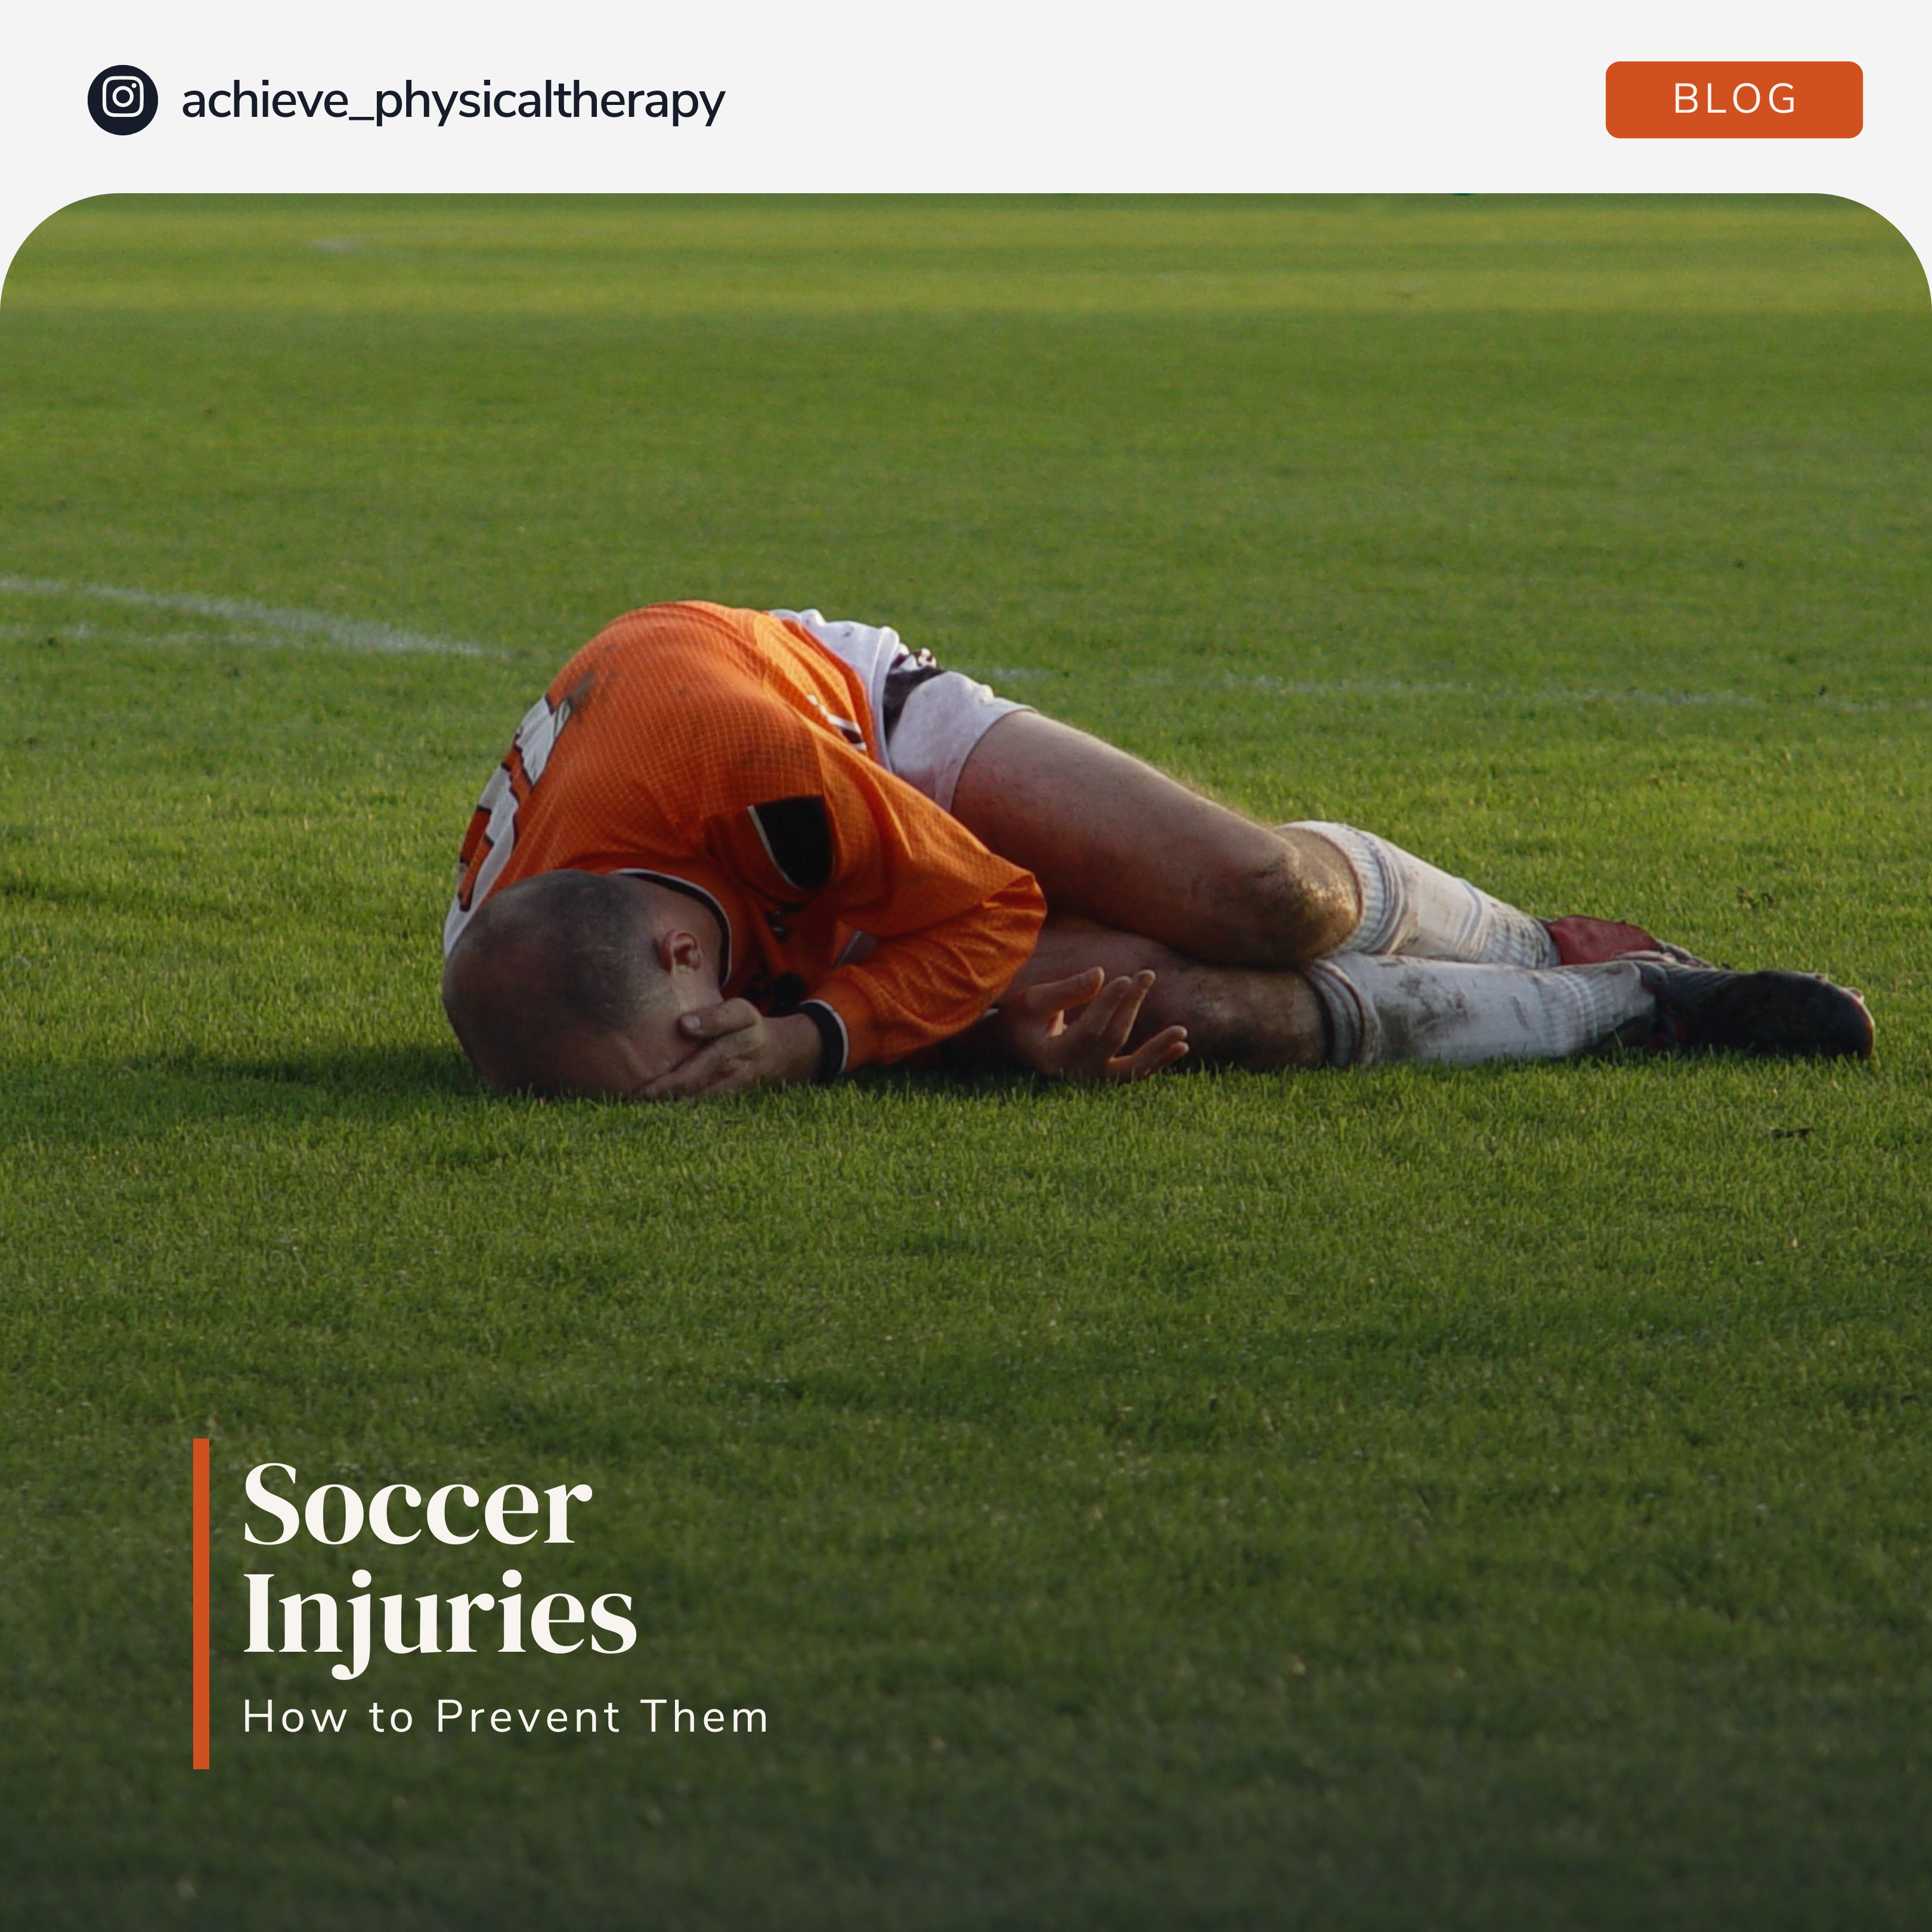 prevent most common soccer injuries, prevent soccer injuries, benefits of playing soccer